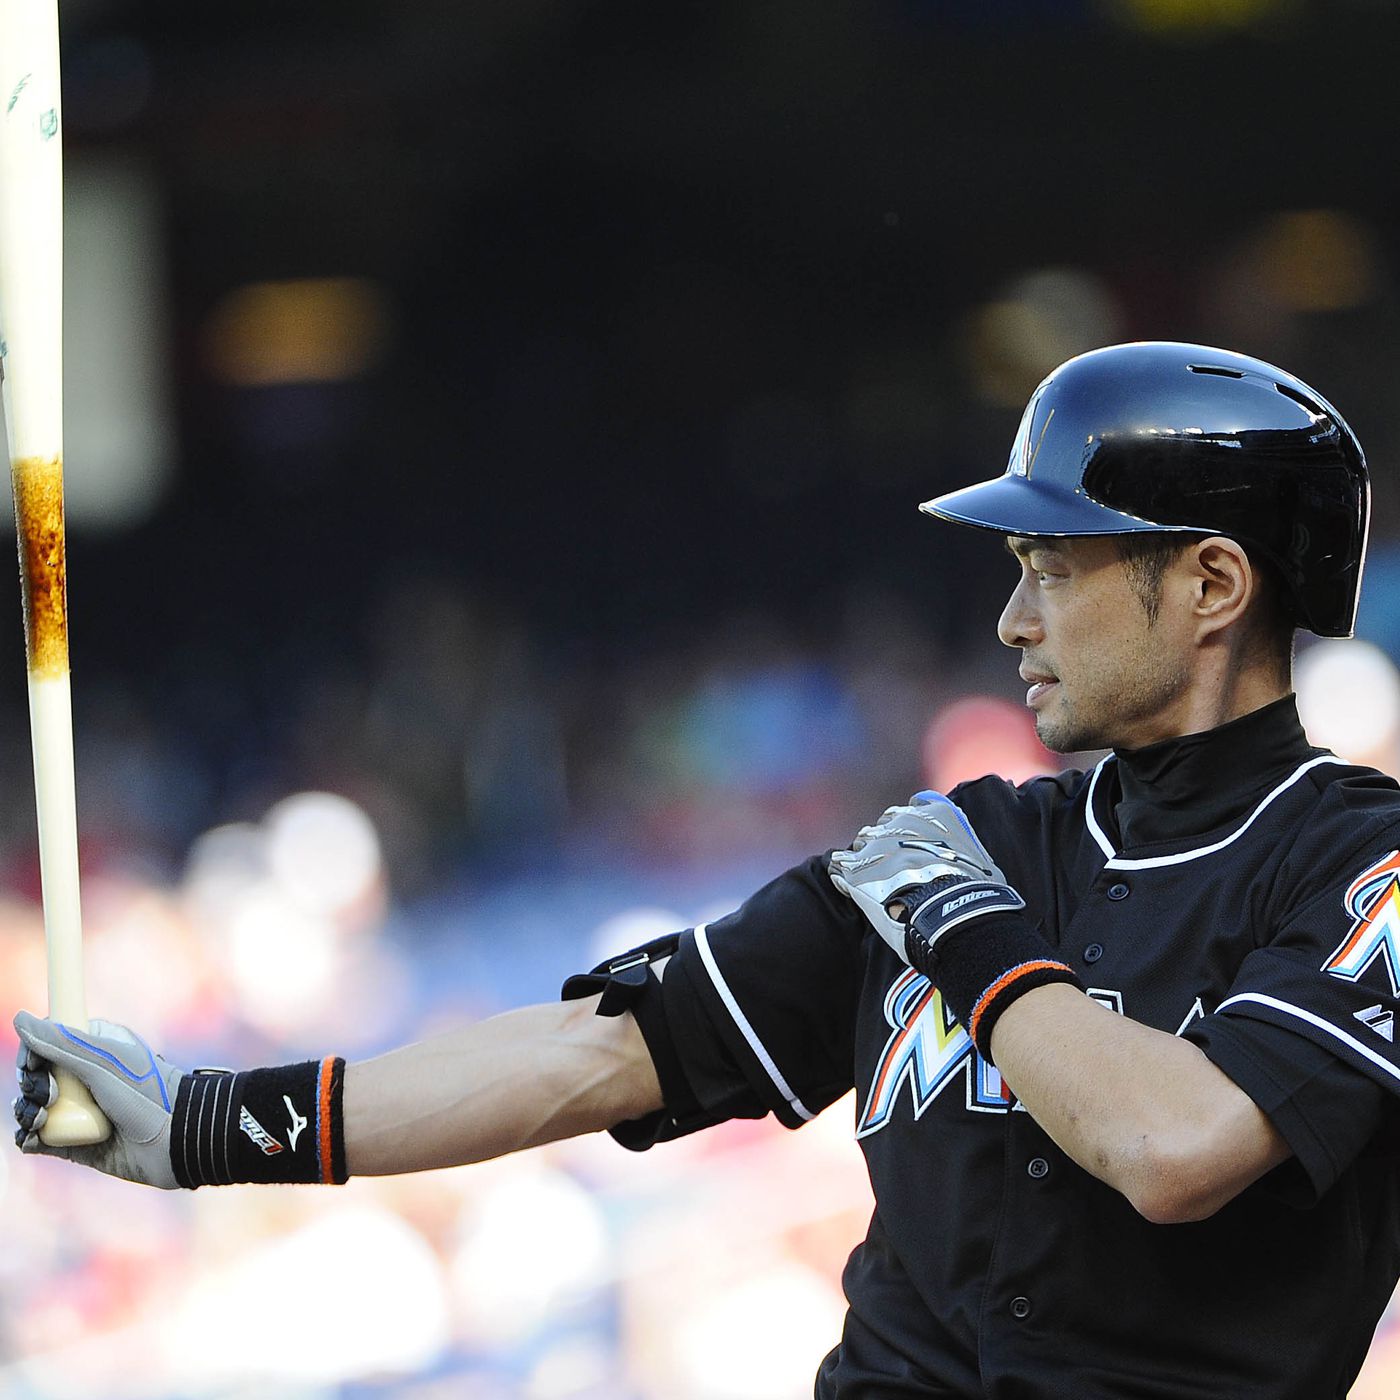 Marlins re-sign Ichiro to one-year, $2 million deal - MLB Daily Dish